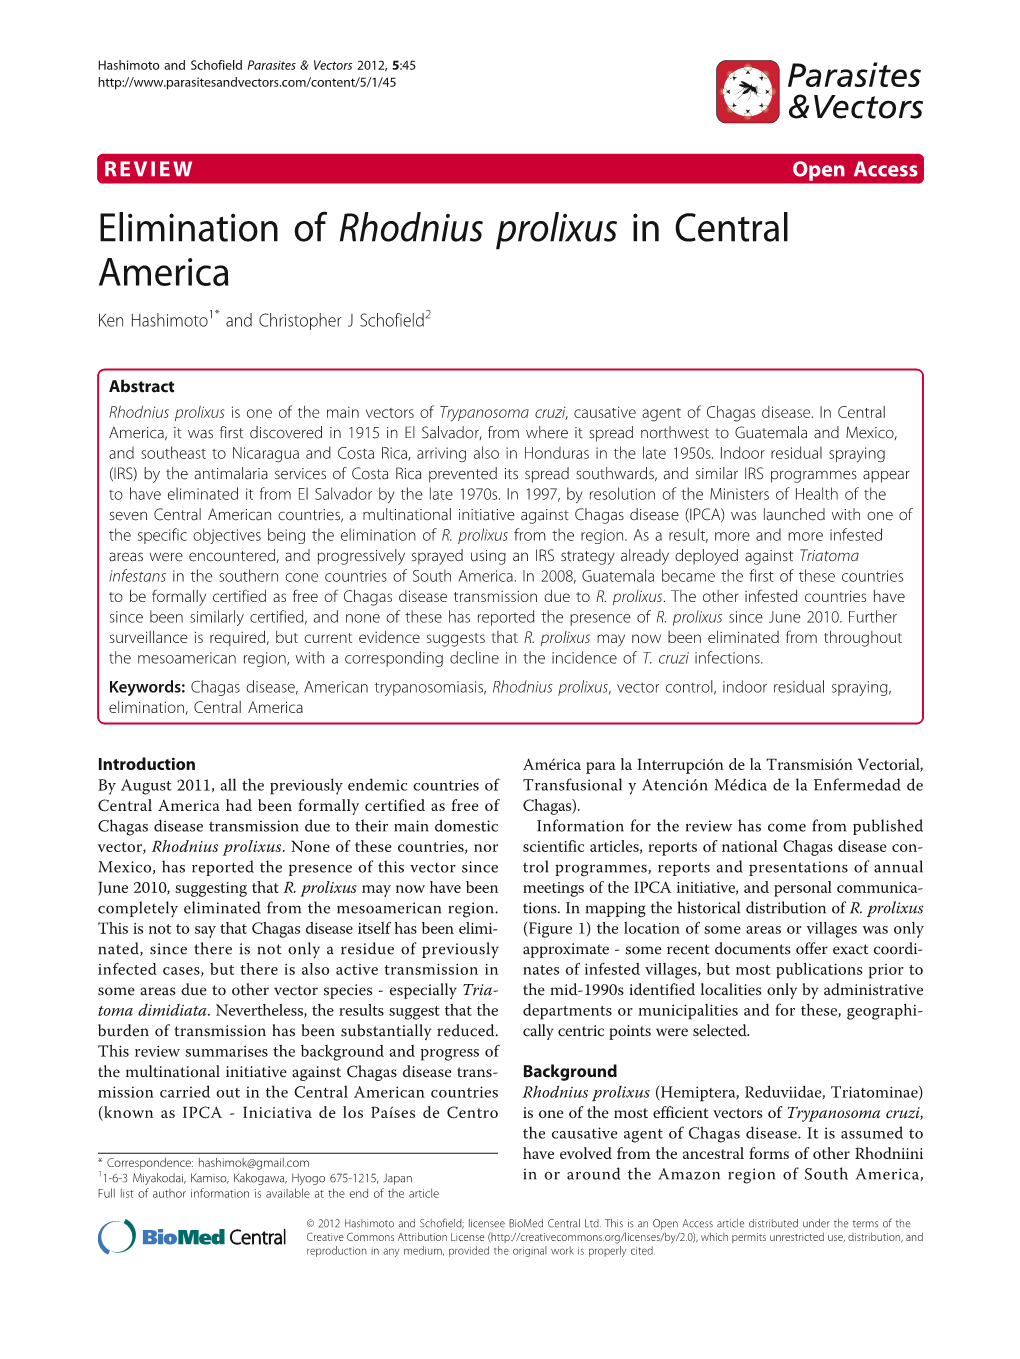 Elimination of Rhodnius Prolixus in Central America Ken Hashimoto1* and Christopher J Schofield2